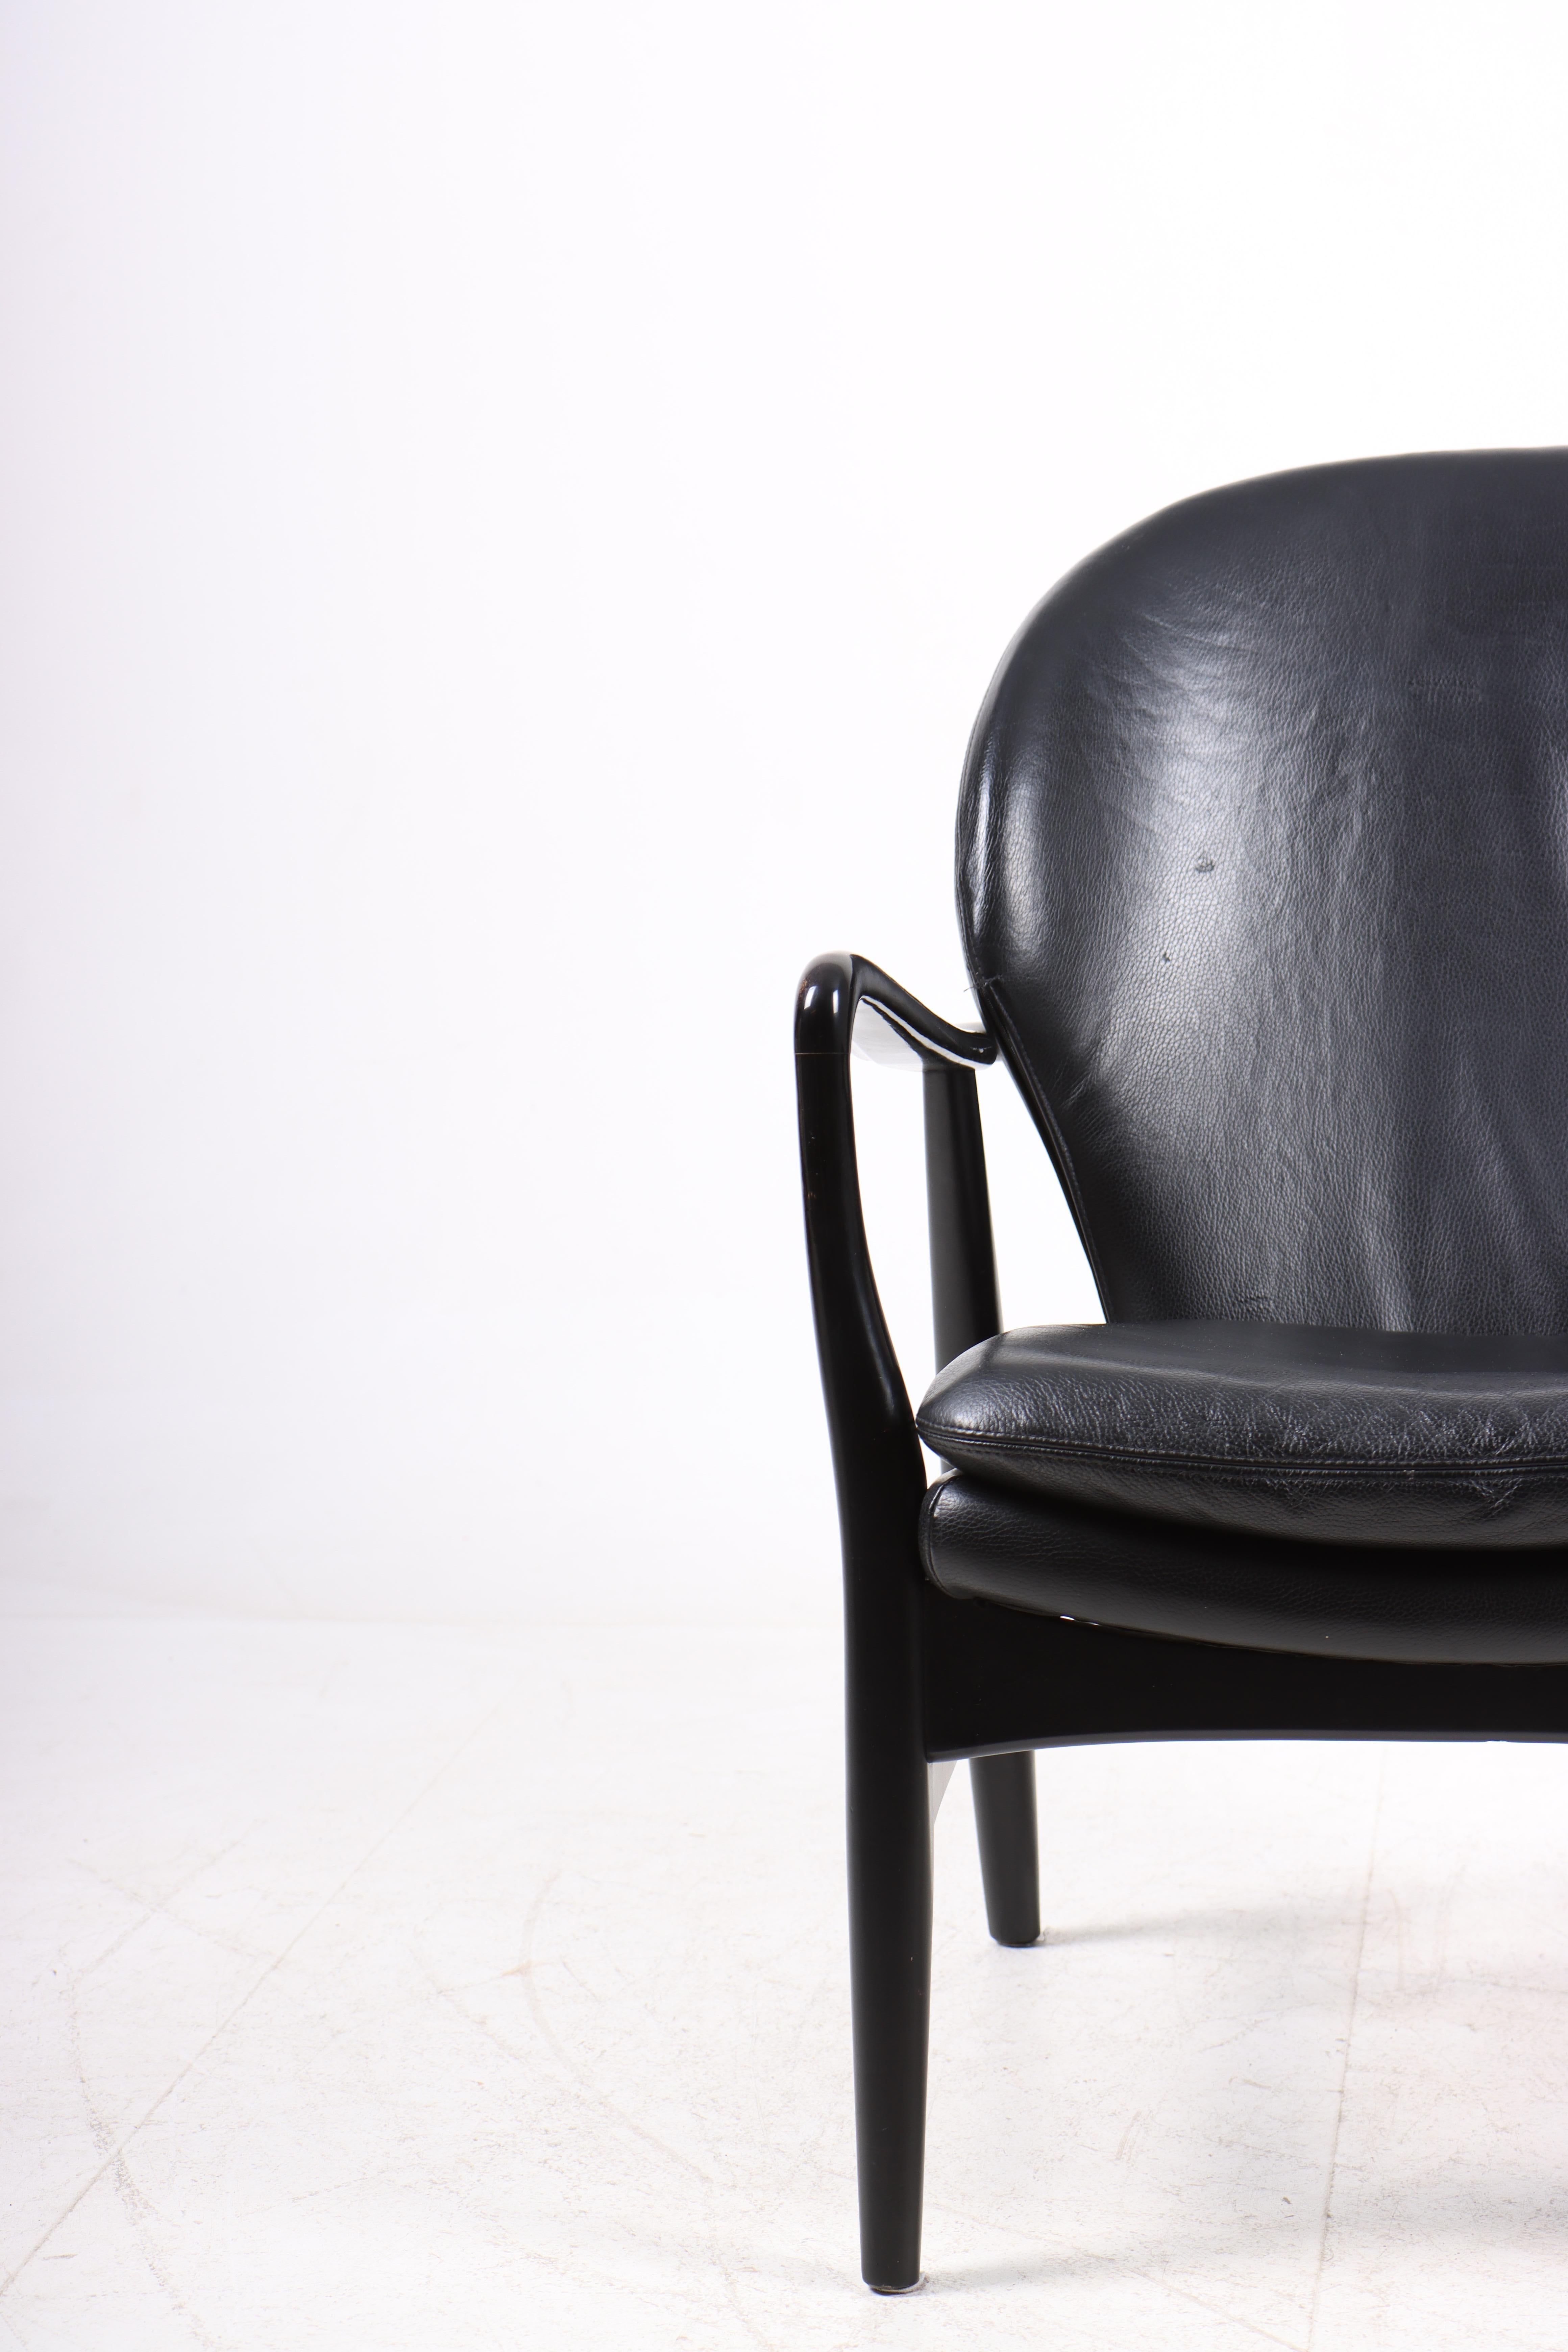 Lounge chair in leather, designed by Danish architects Ib Madsen & Acton Schubell.